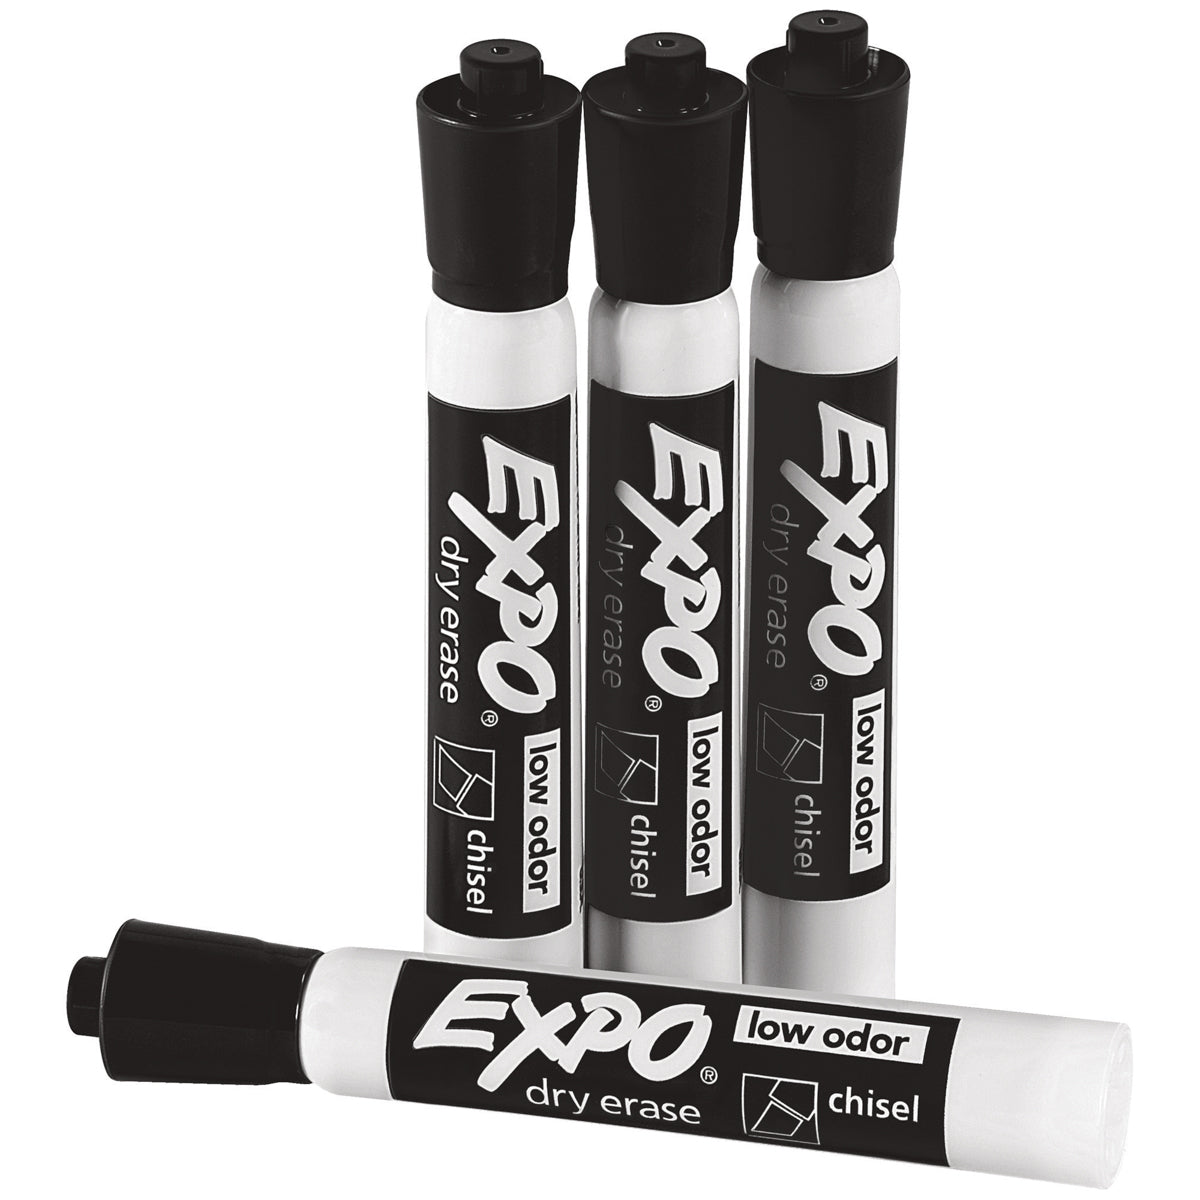 Expo Black Dry Erase Markers 12/Pack